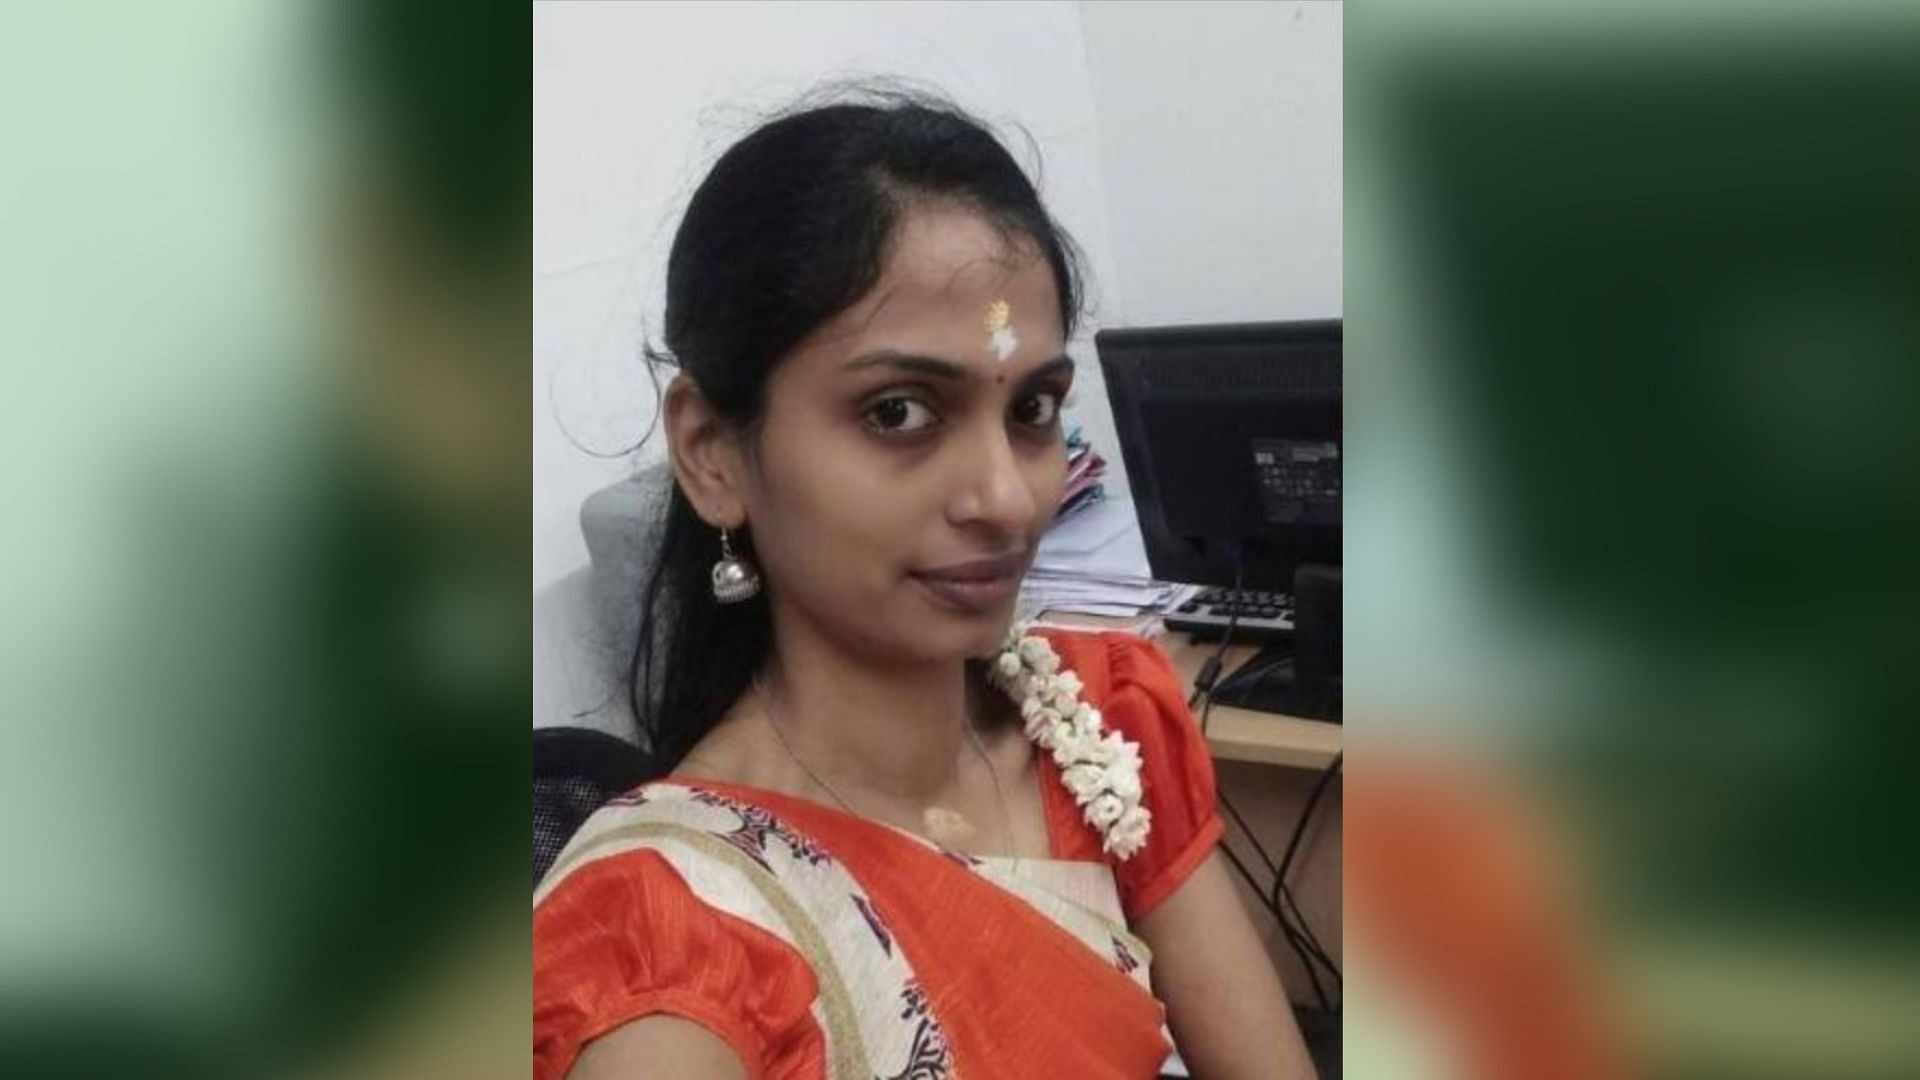 N Rajeswari’s legs were crushed by a speeding truck when she fell off her scooter after an AIADMK flagpost erected on the side of the road tilted towards her.